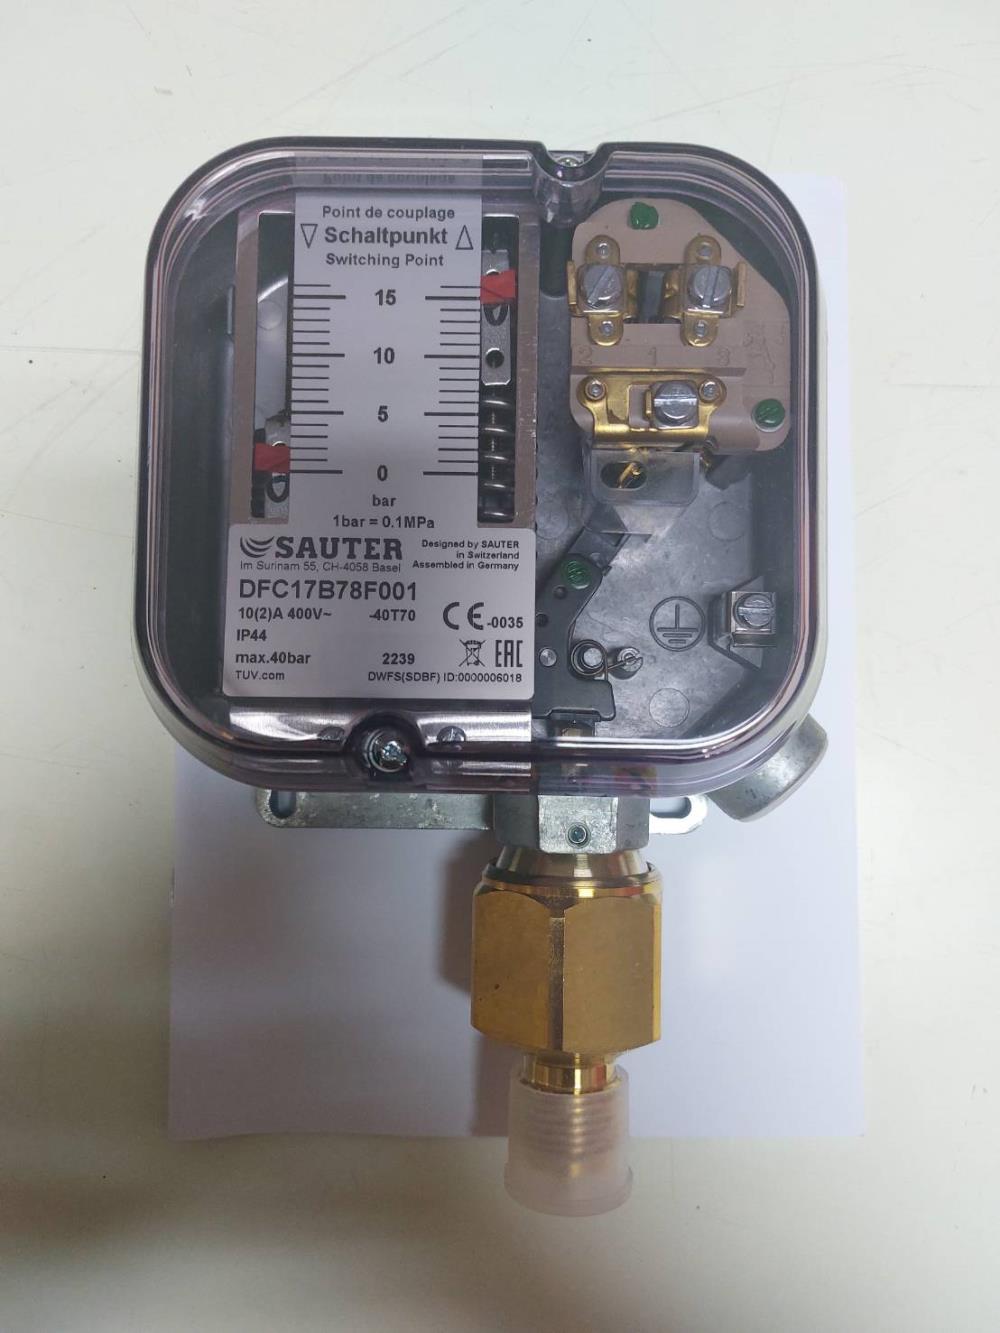  " SAUTER " Pressure Switch DFC17B78F001,DFC17B78F001, SAUTER ,Instruments and Controls/Switches